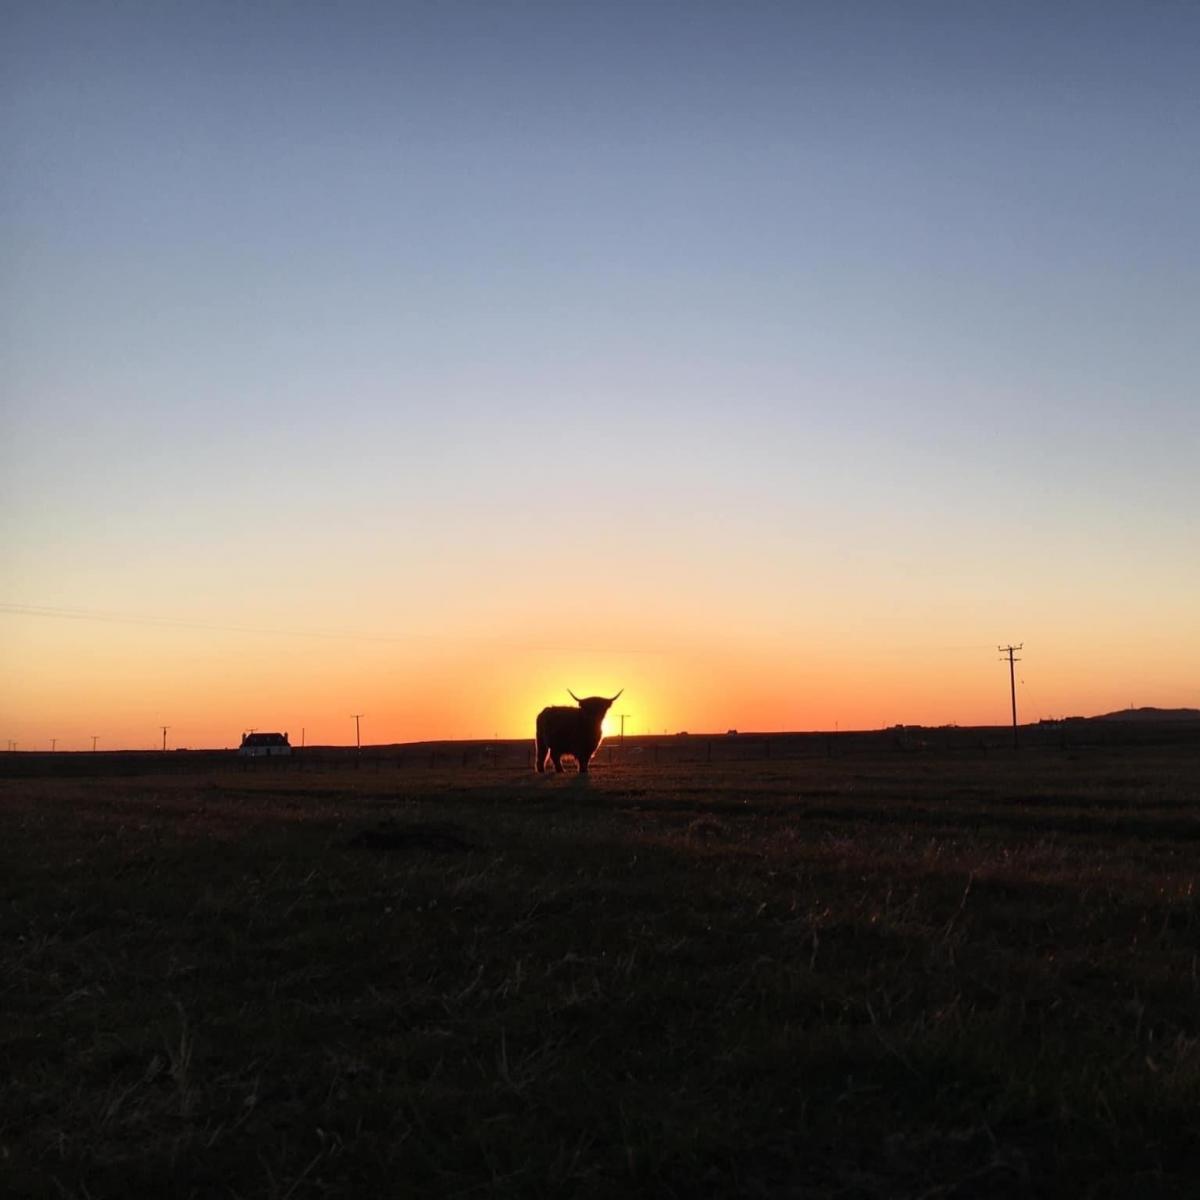 Fiona Armstong - Sunset at Balemartine - One of our highland cattle perfectly placed when the sun was setting. Balemartine fold, Isle of Tiree Photo taken by Emily Armstrong